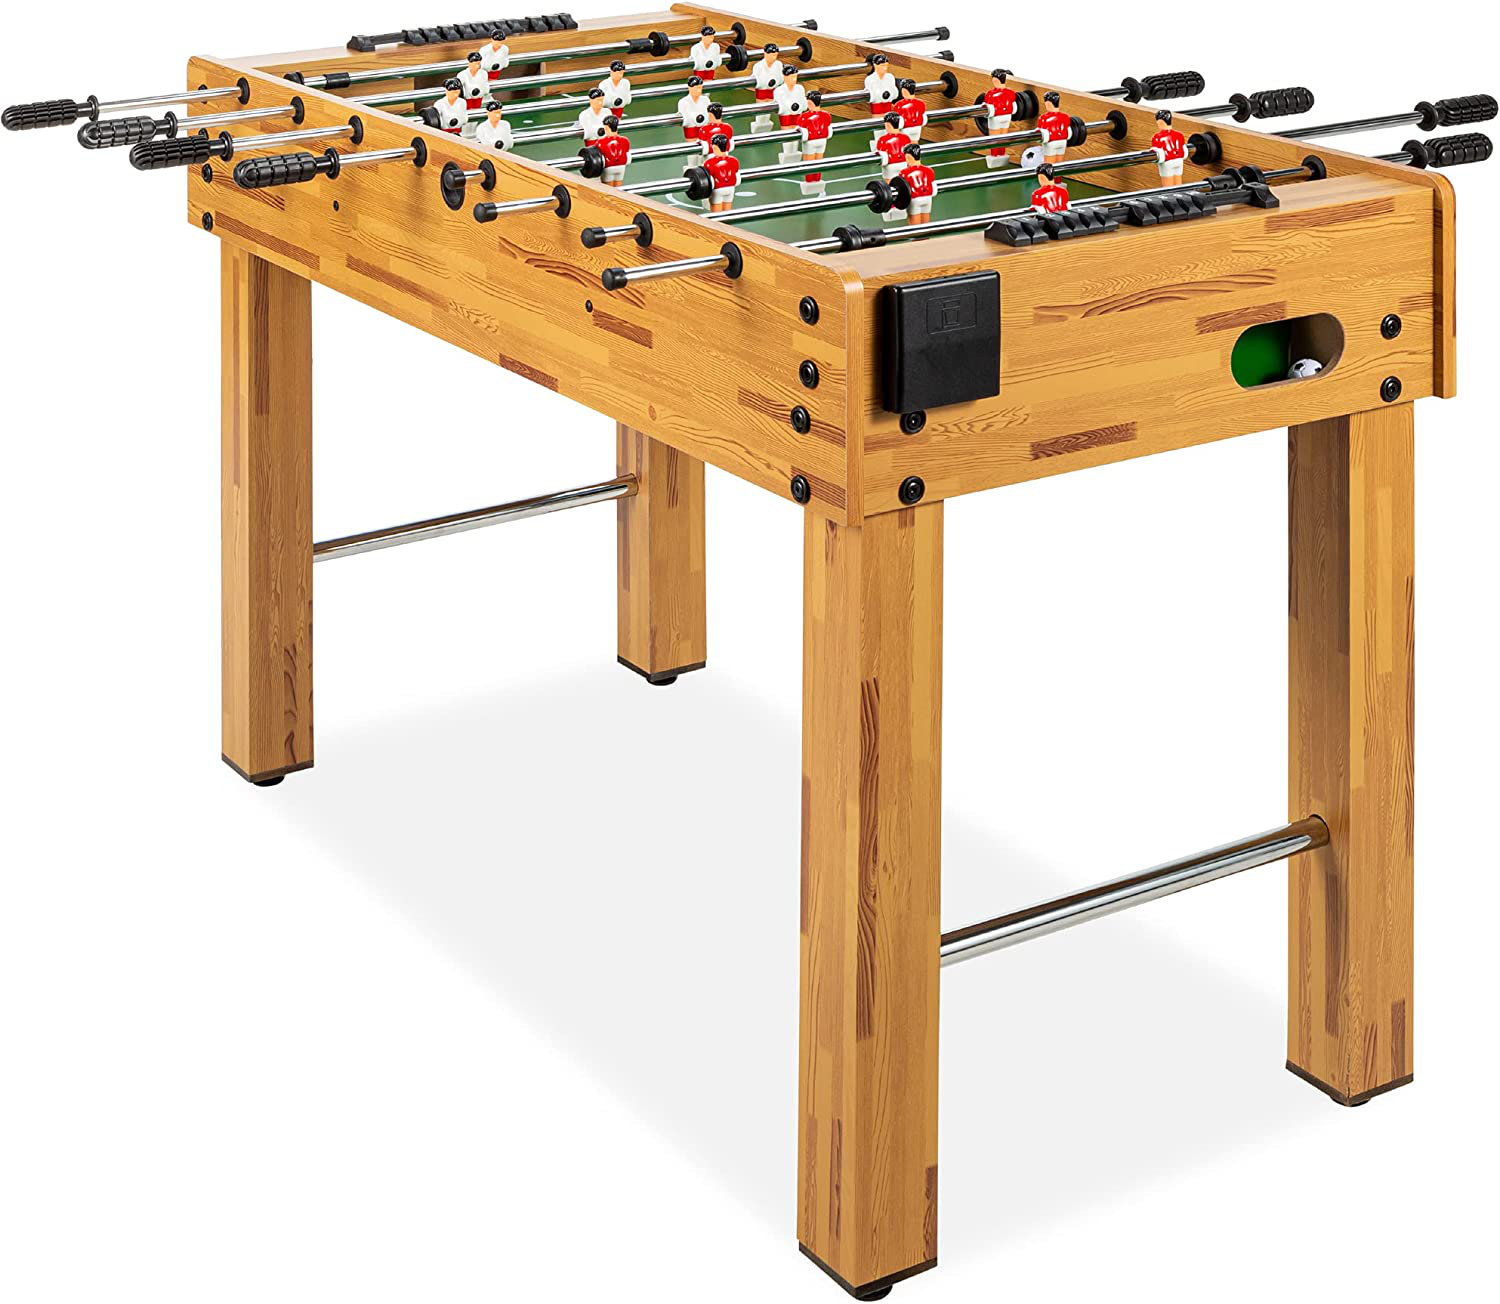 A Home 48'' L Foosball Table with Telescopic Rods